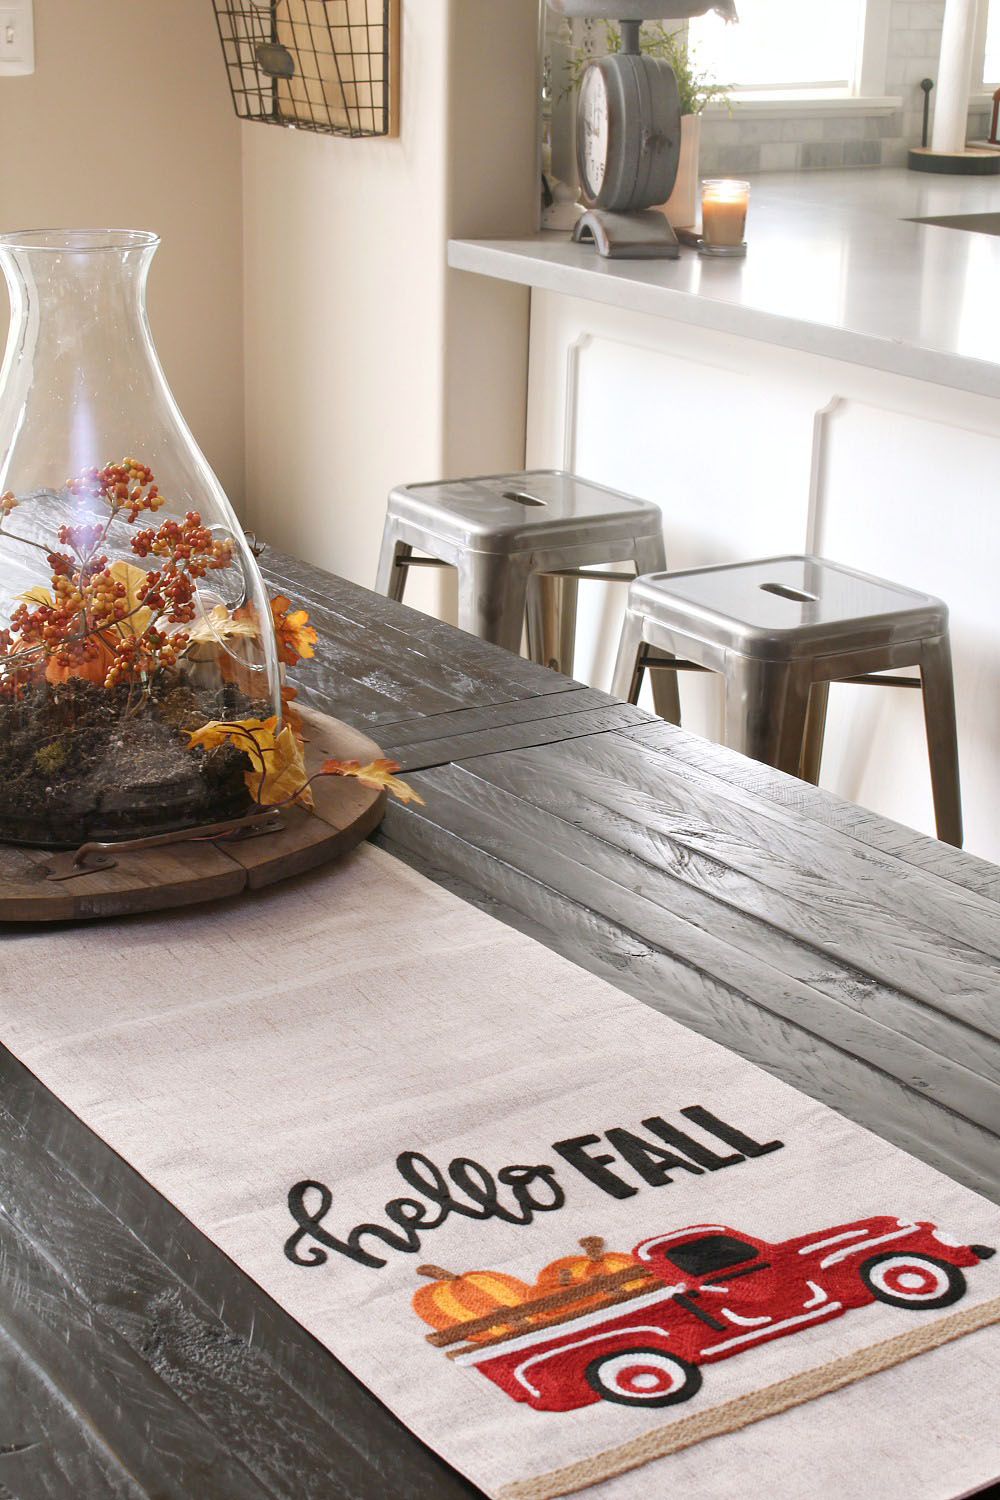 Fall kitchen decorating ideas. This is such a cute farmtruck table runner!